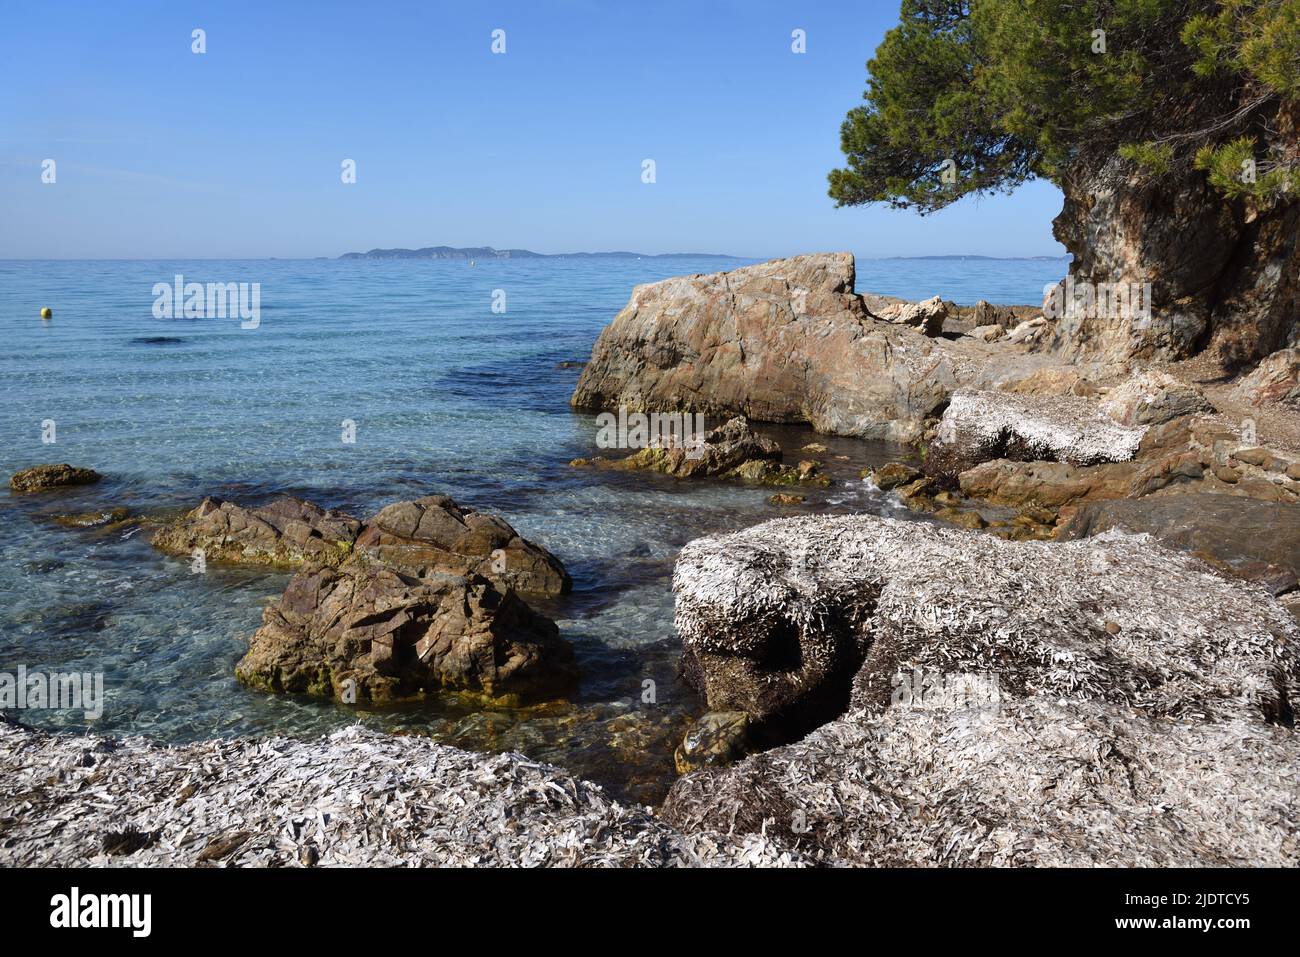 Rocky Seashore of Vignasse Beach covered in Dried Seagrass, or Posidonia Grass, Bormes-les-Mimosas Mediterranean Coast Côte-d'Azur Var France Stock Photo